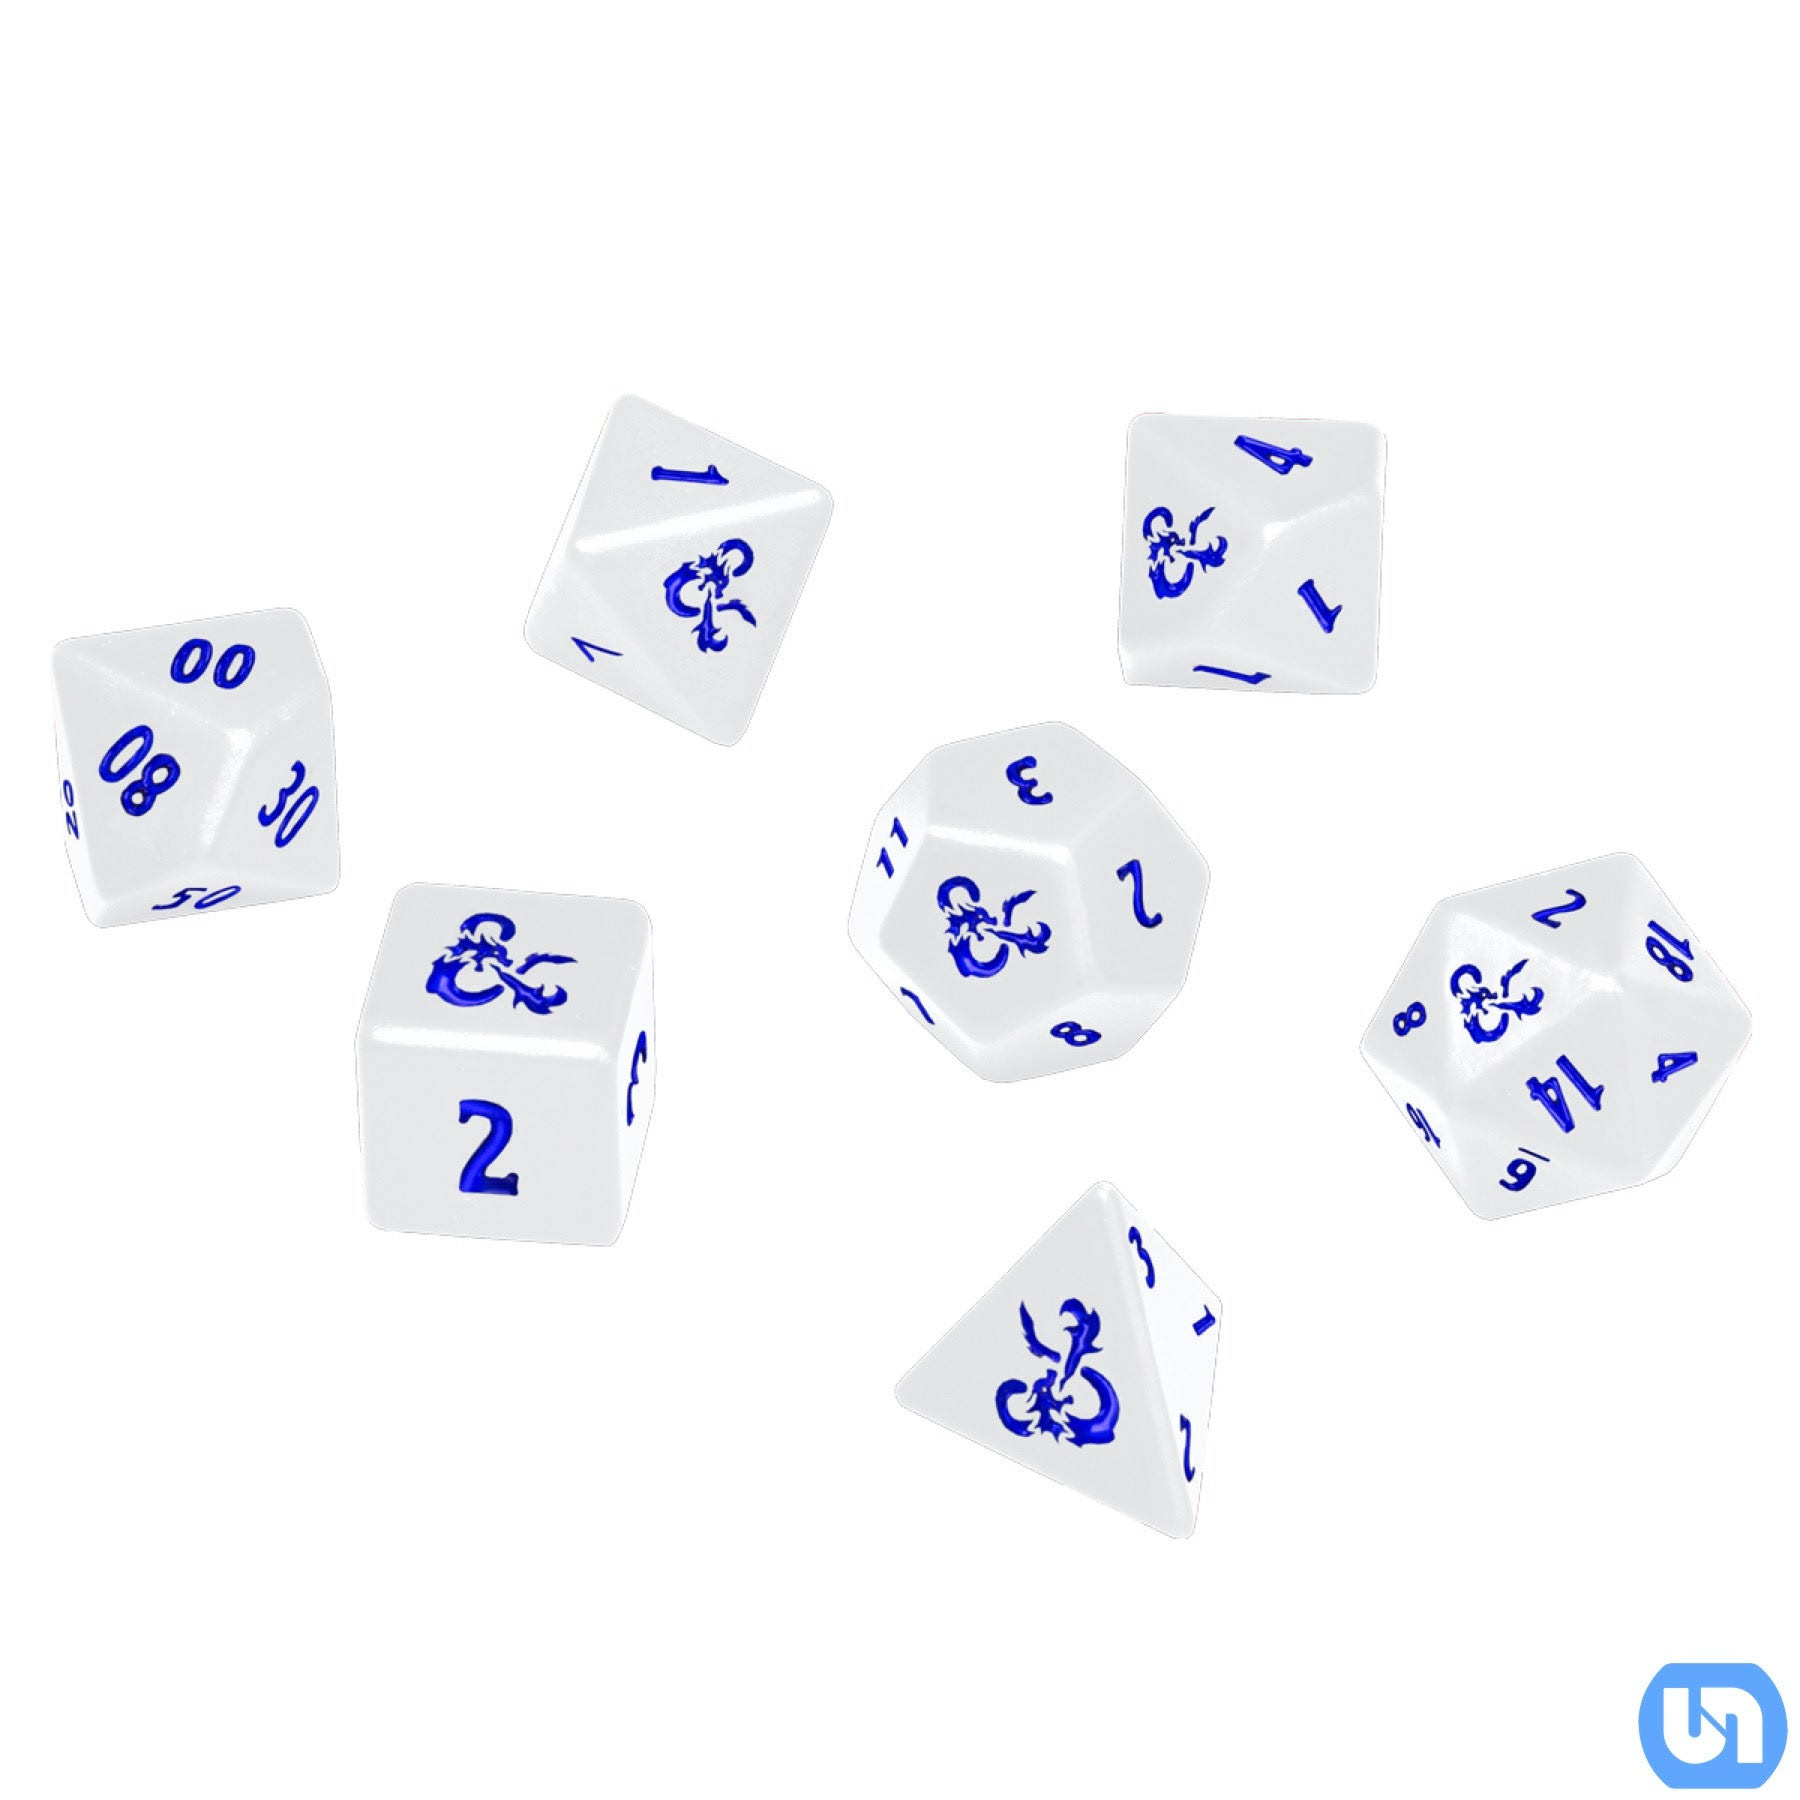 Ultra Pro Dungeons & Dragons - Icewind Dale: Heavy Metal 7 RPG Dice Set (White)